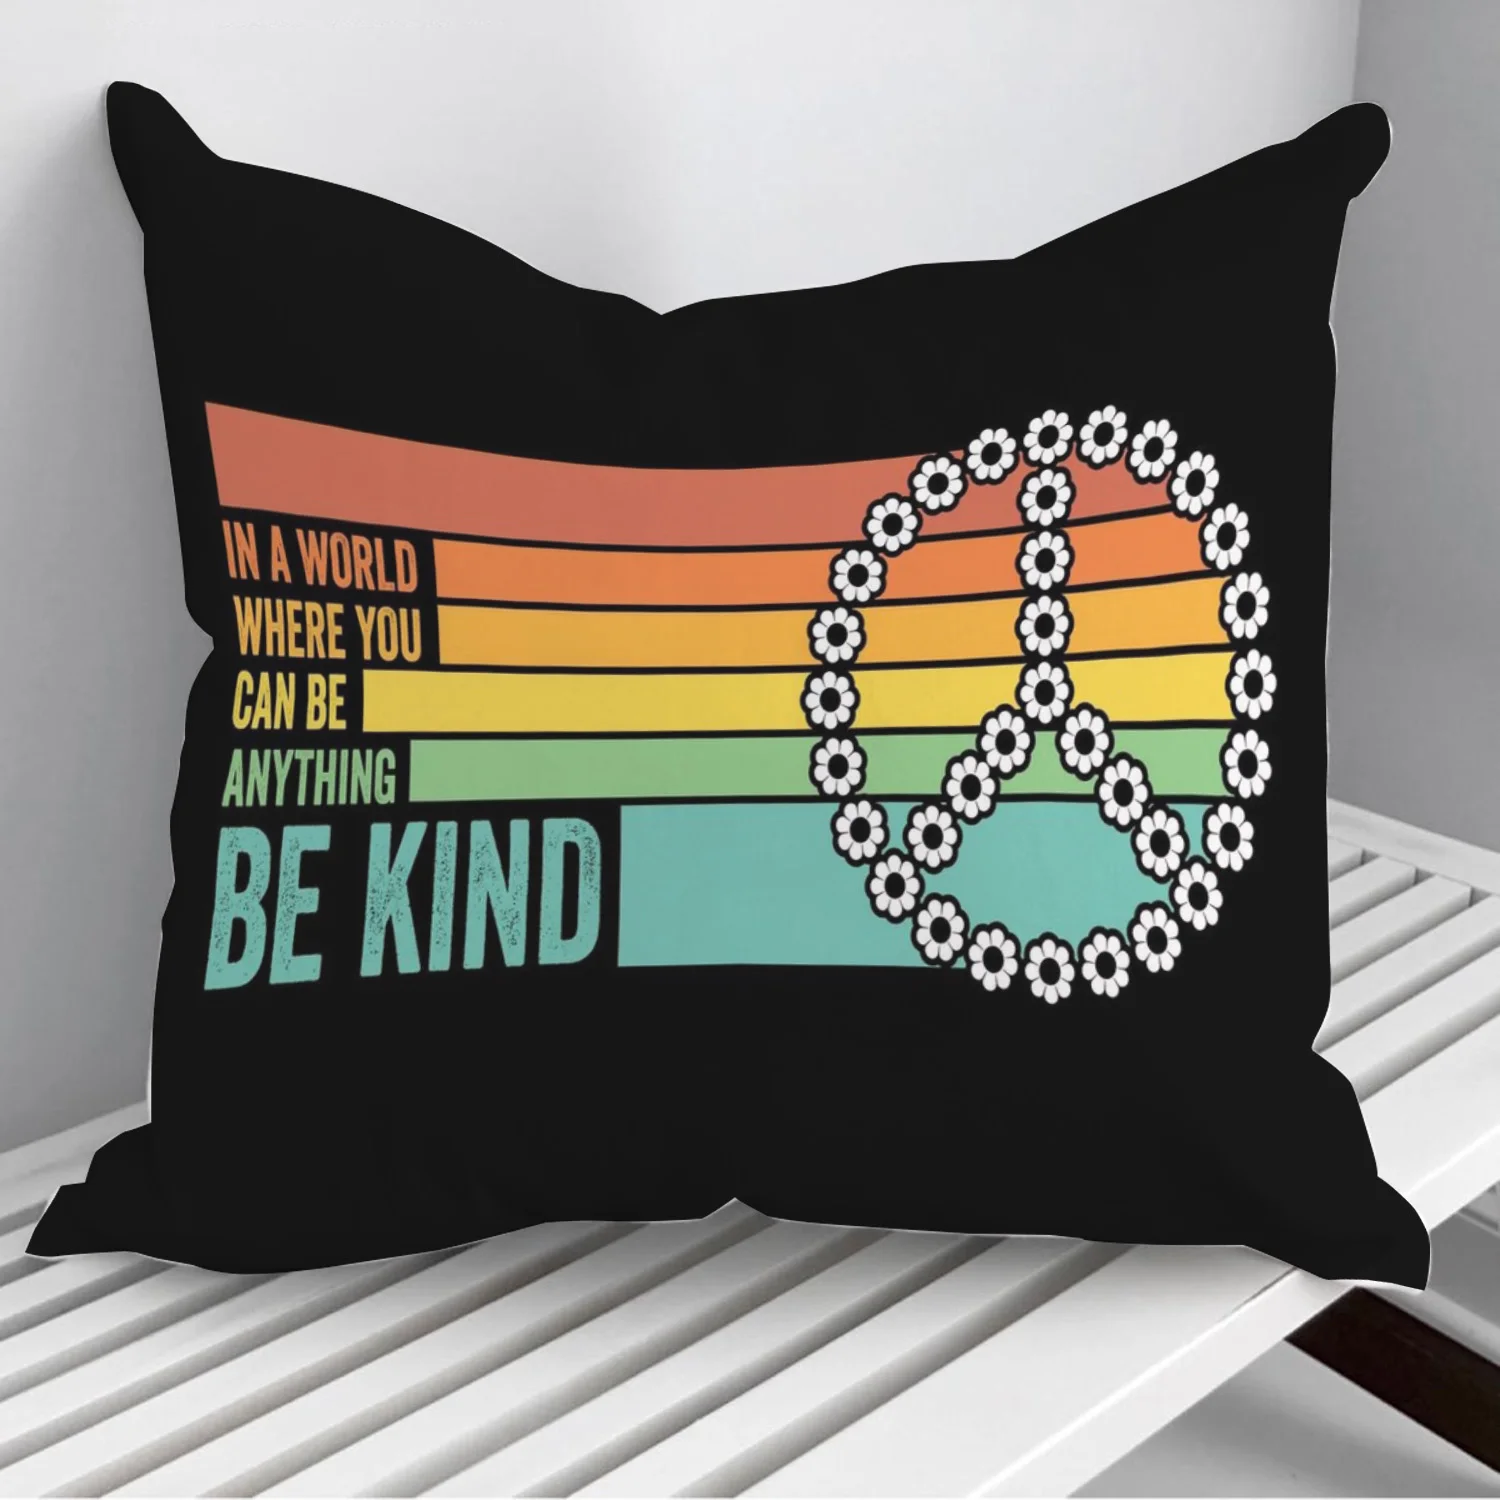 

Be Kind Vegan Quote Throw Pillows Cushion Cover On Sofa Home Decor 45*45cm 40*40cm Gift Pillowcase Cojines Dropshipping